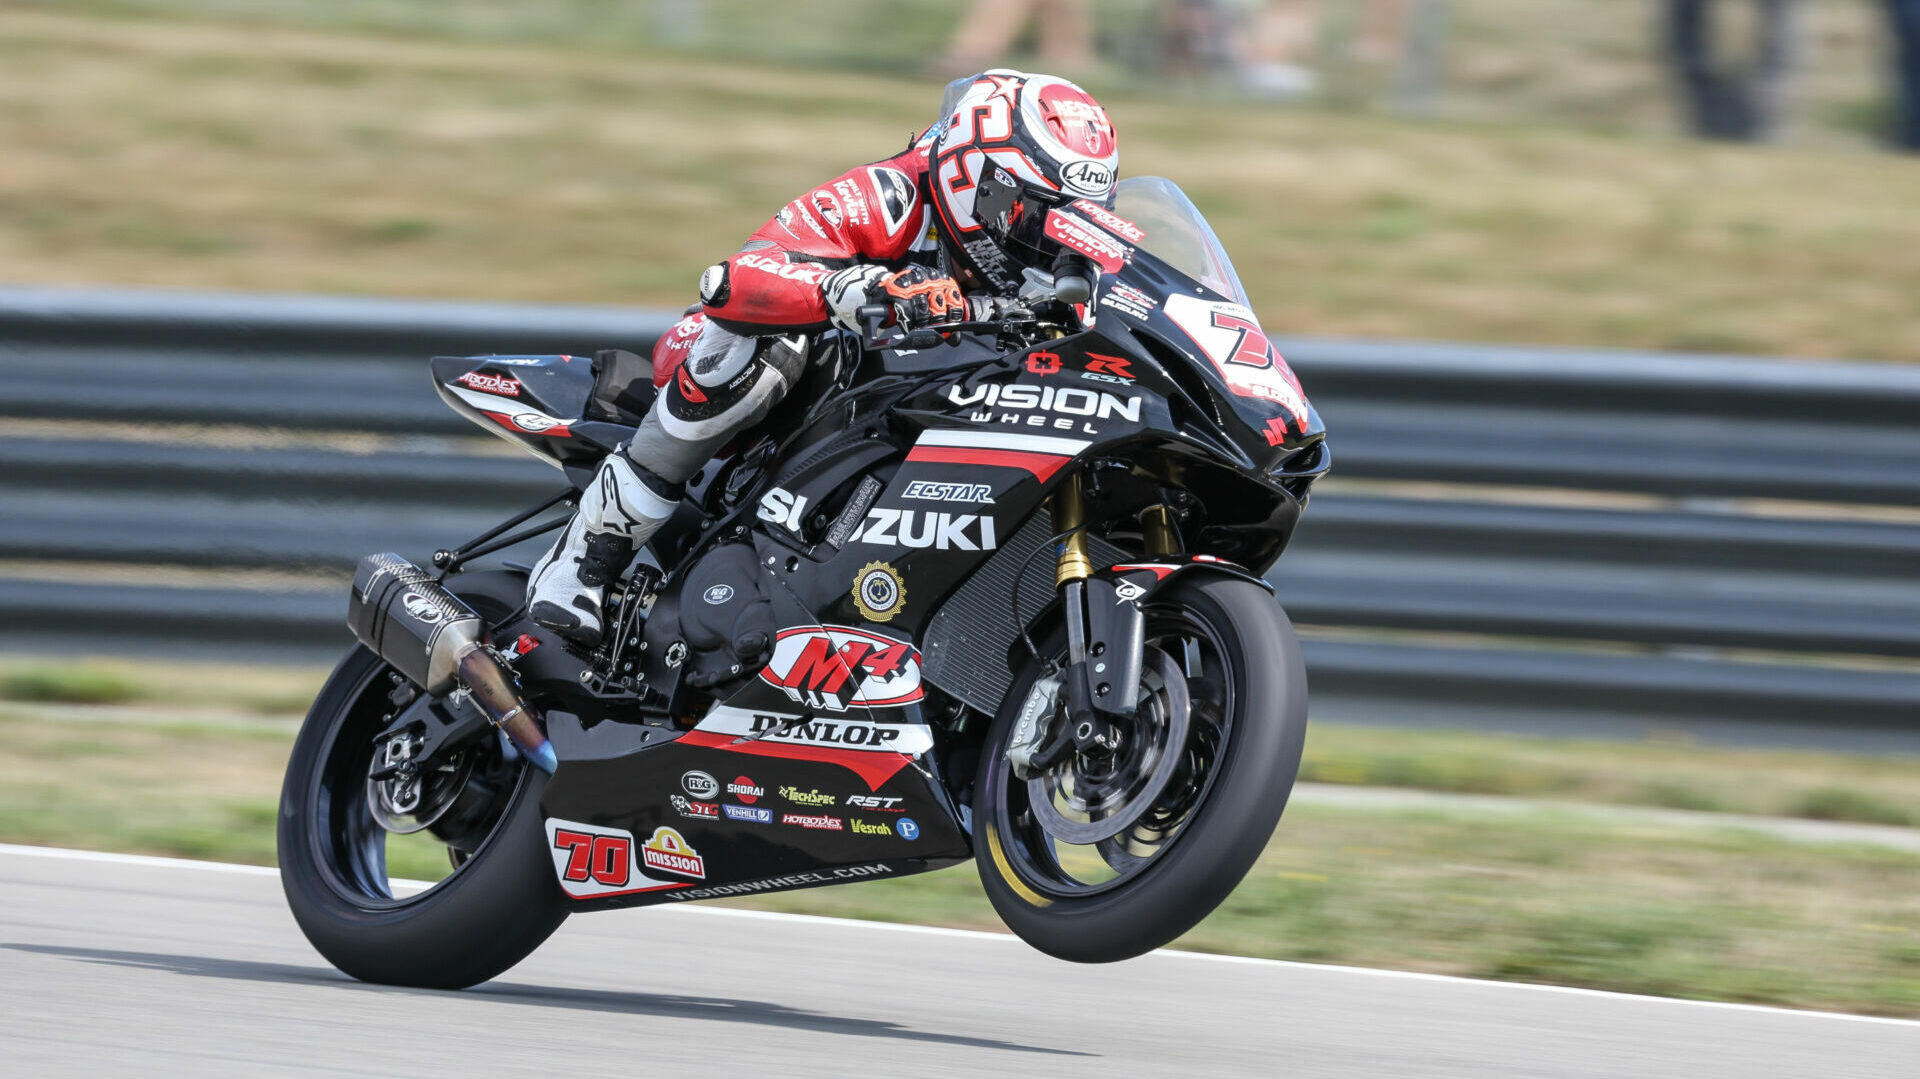 Tyler Scott (70) continues his podium stand with his eighth of the season in Race Two at Pittsburgh. Photo by Brian J. Nelson, courtesy Suzuki Motor USA, LLC.